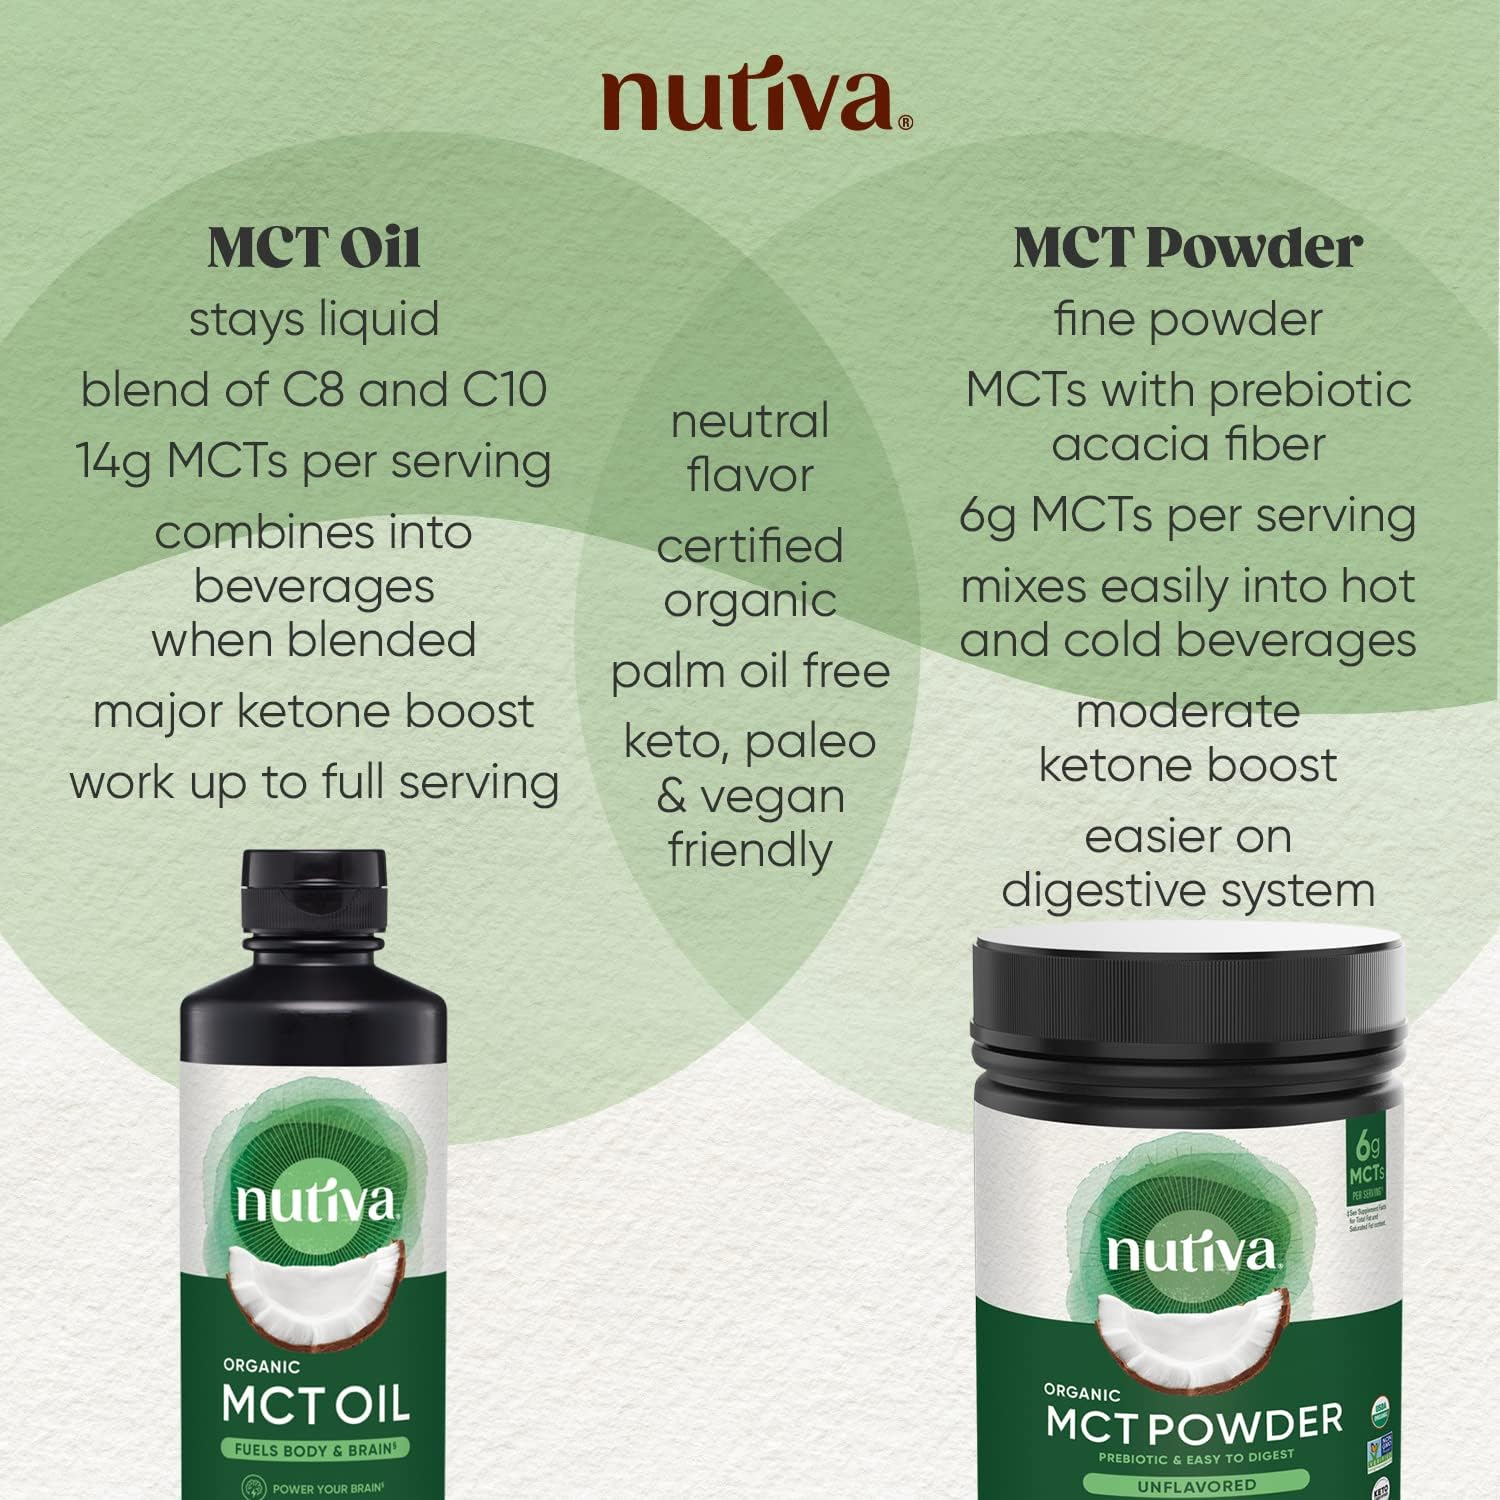 Nutiva Organic MCT Oil, 1 gallon, Unflavored for Coffee, Non-GMO made from Organic Coconuts, Keto Friendly, Best Oil Wellness Ketosis Supplement, 14g of C8 & C10 per serving : Health & Household